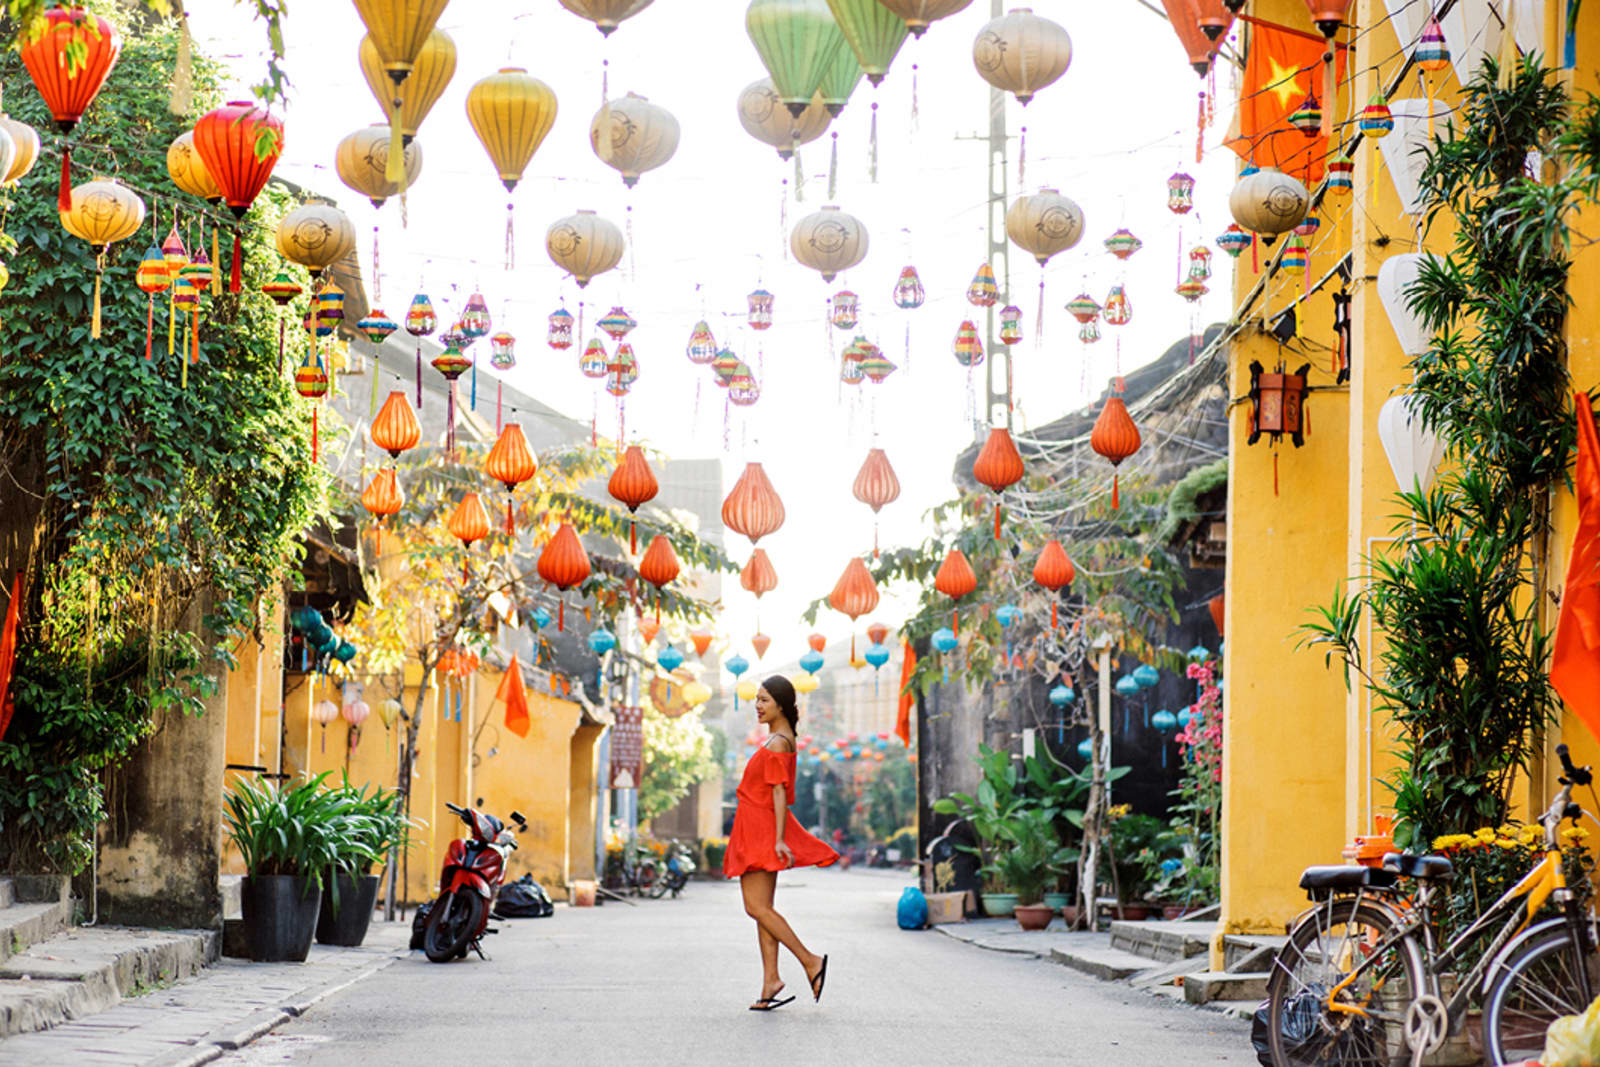 A woman stands under strings of lanterns on a street in Vietnam